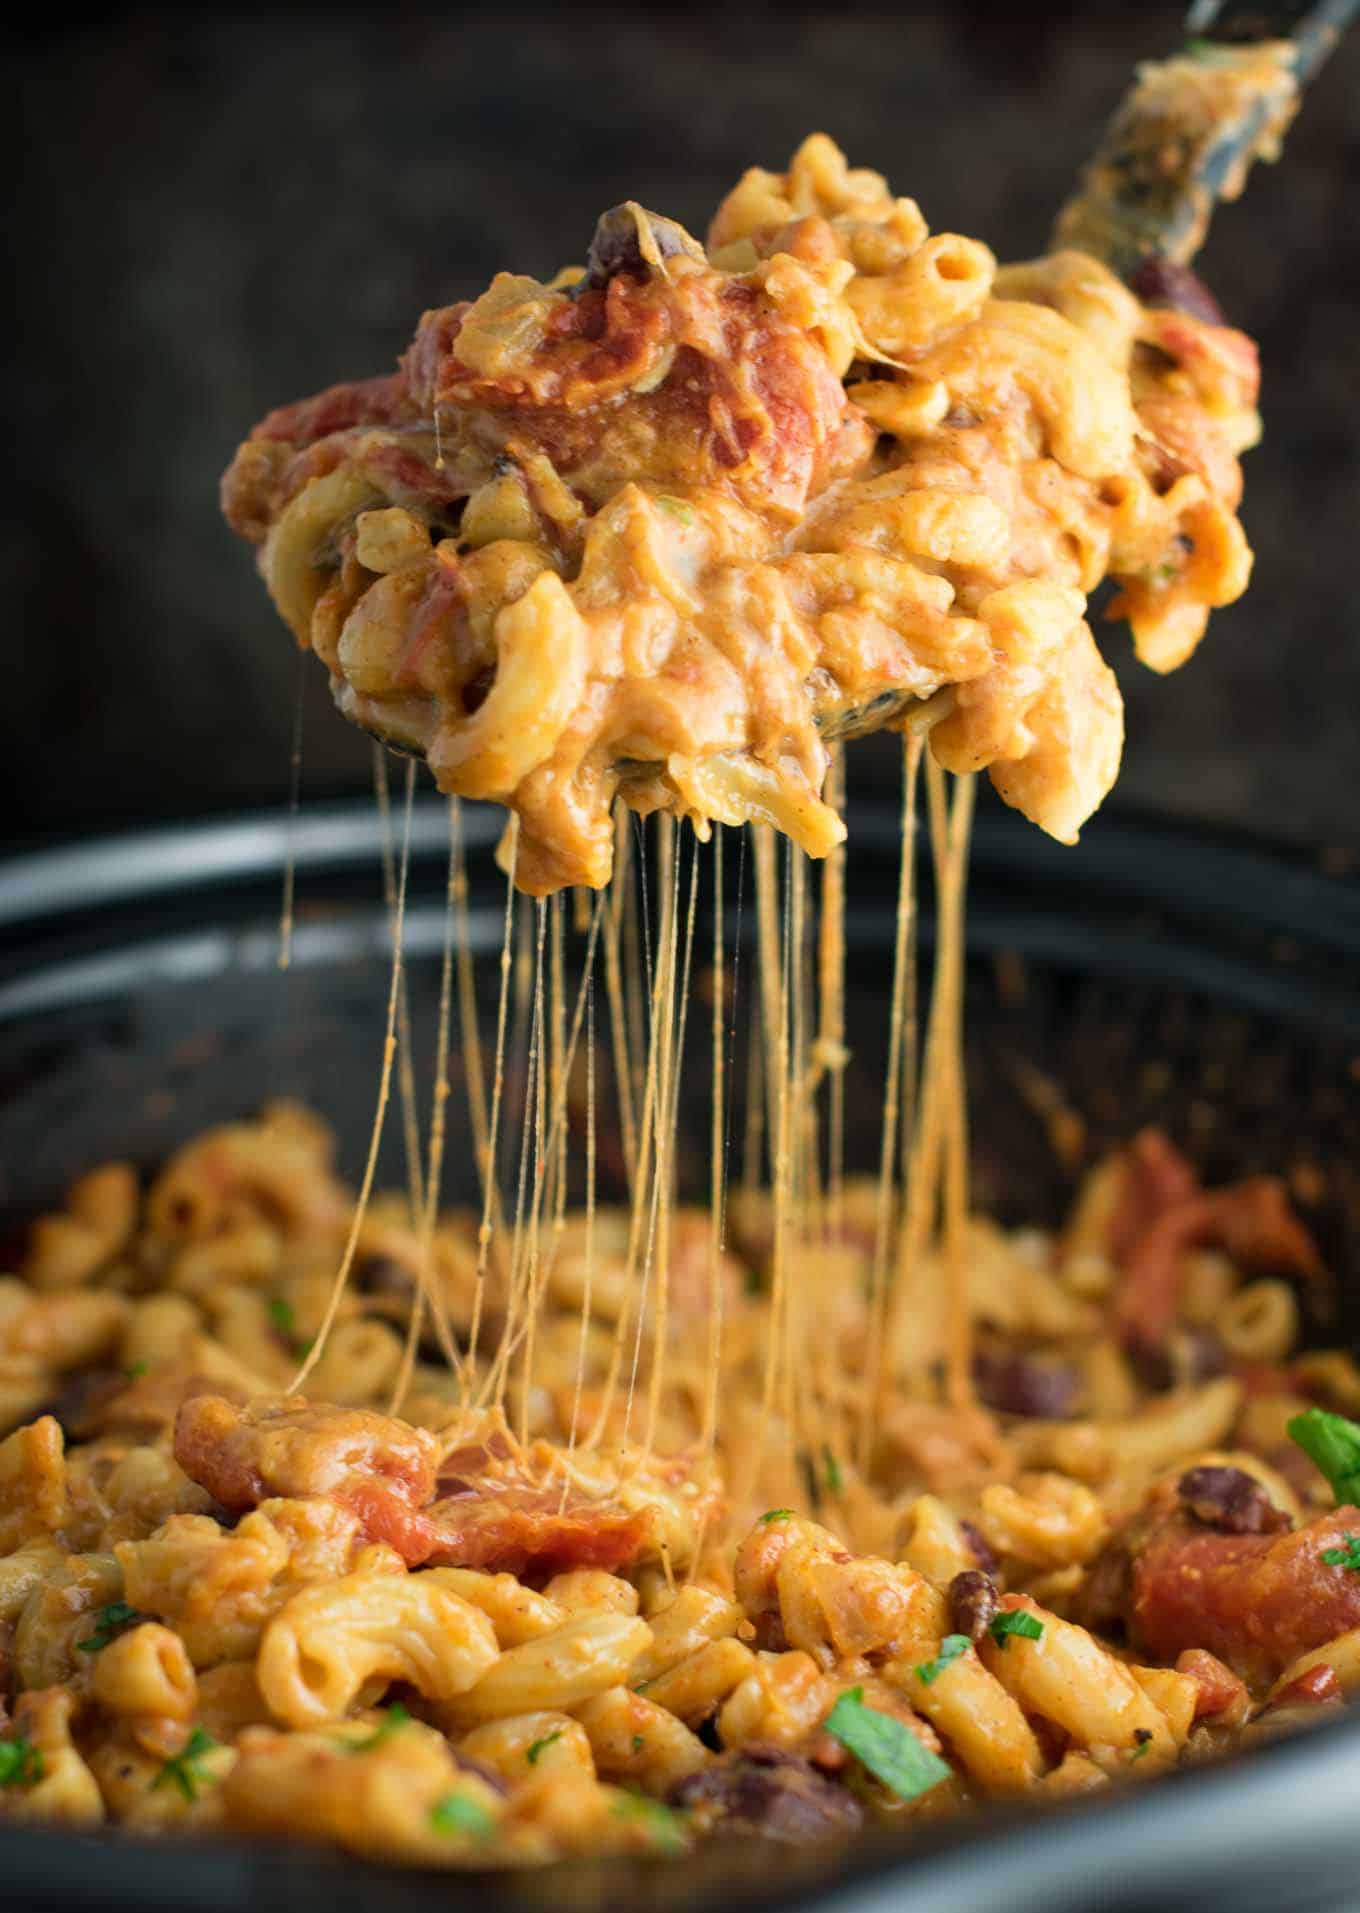 This Slow Cooker Vegetarian Chili Mac Recipe is made all in the crockpot (even the noodles!). A super easy vegetarian crockpot recipe to feed a crowd. #vegetarian #slowcooker #crockpot #chilimac